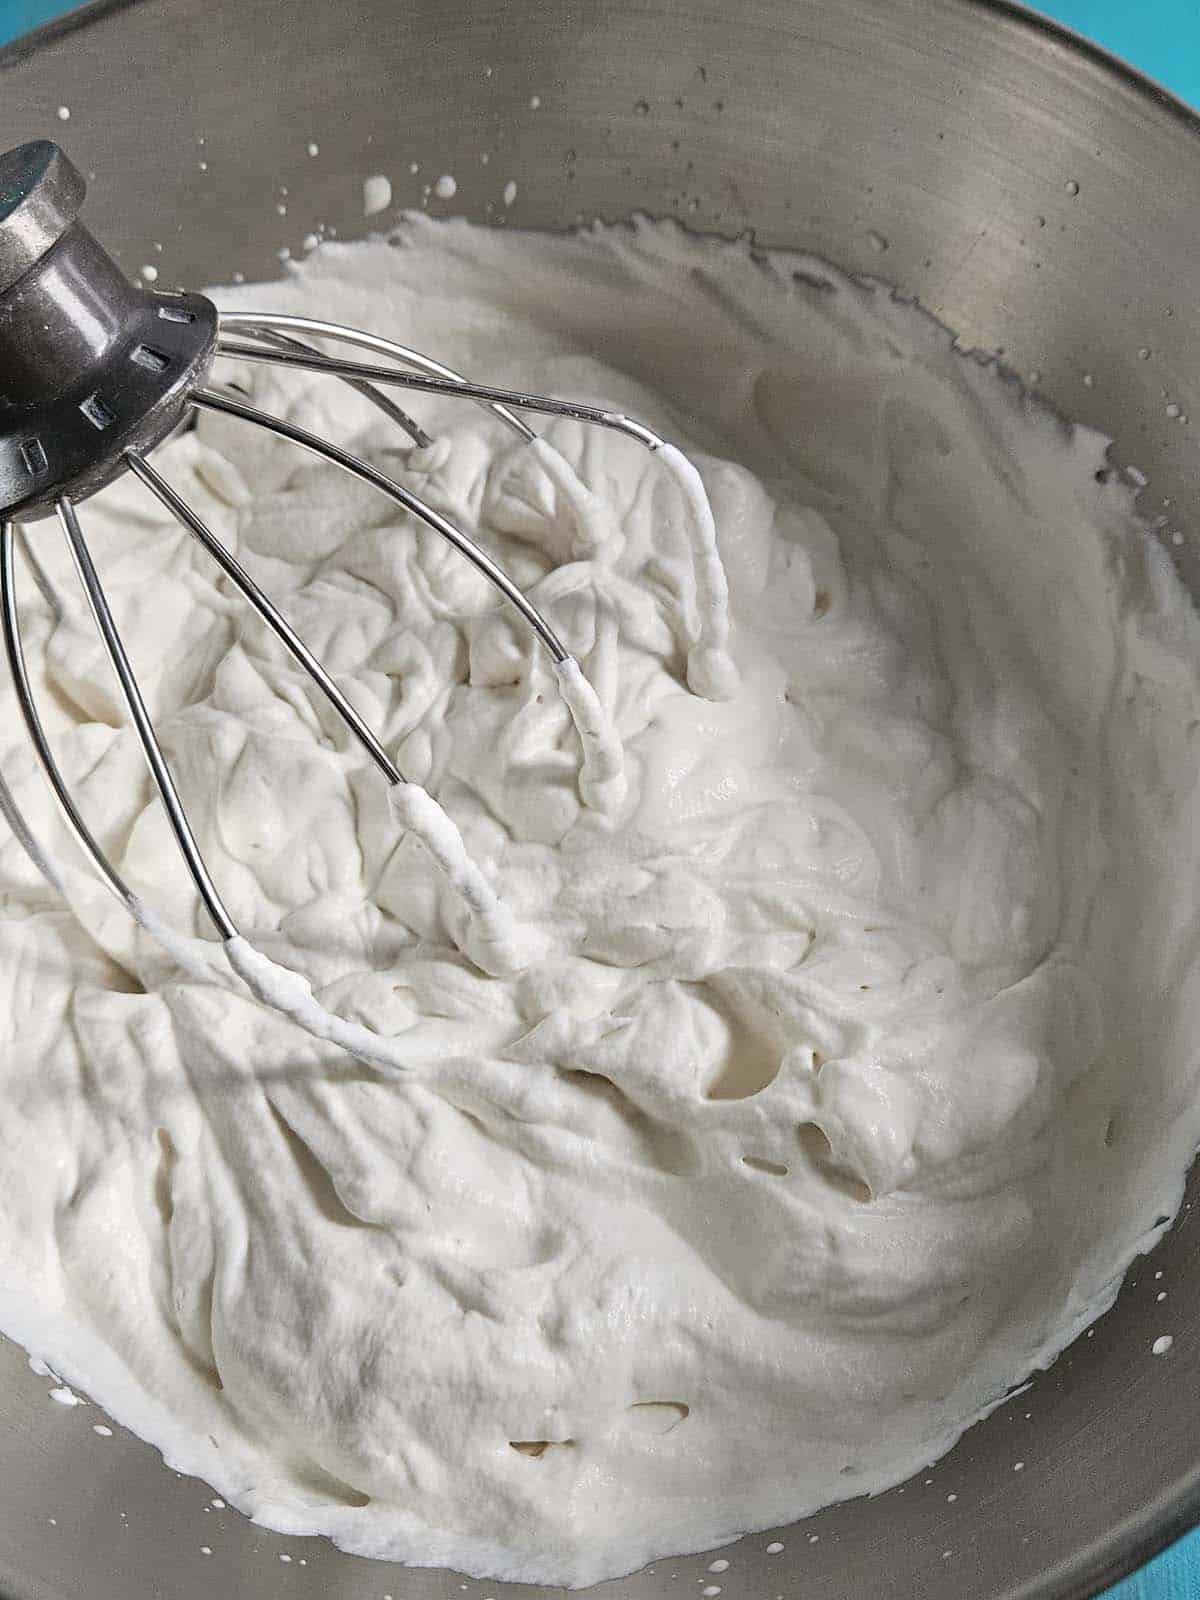 Whipped cream in a metal bowl.